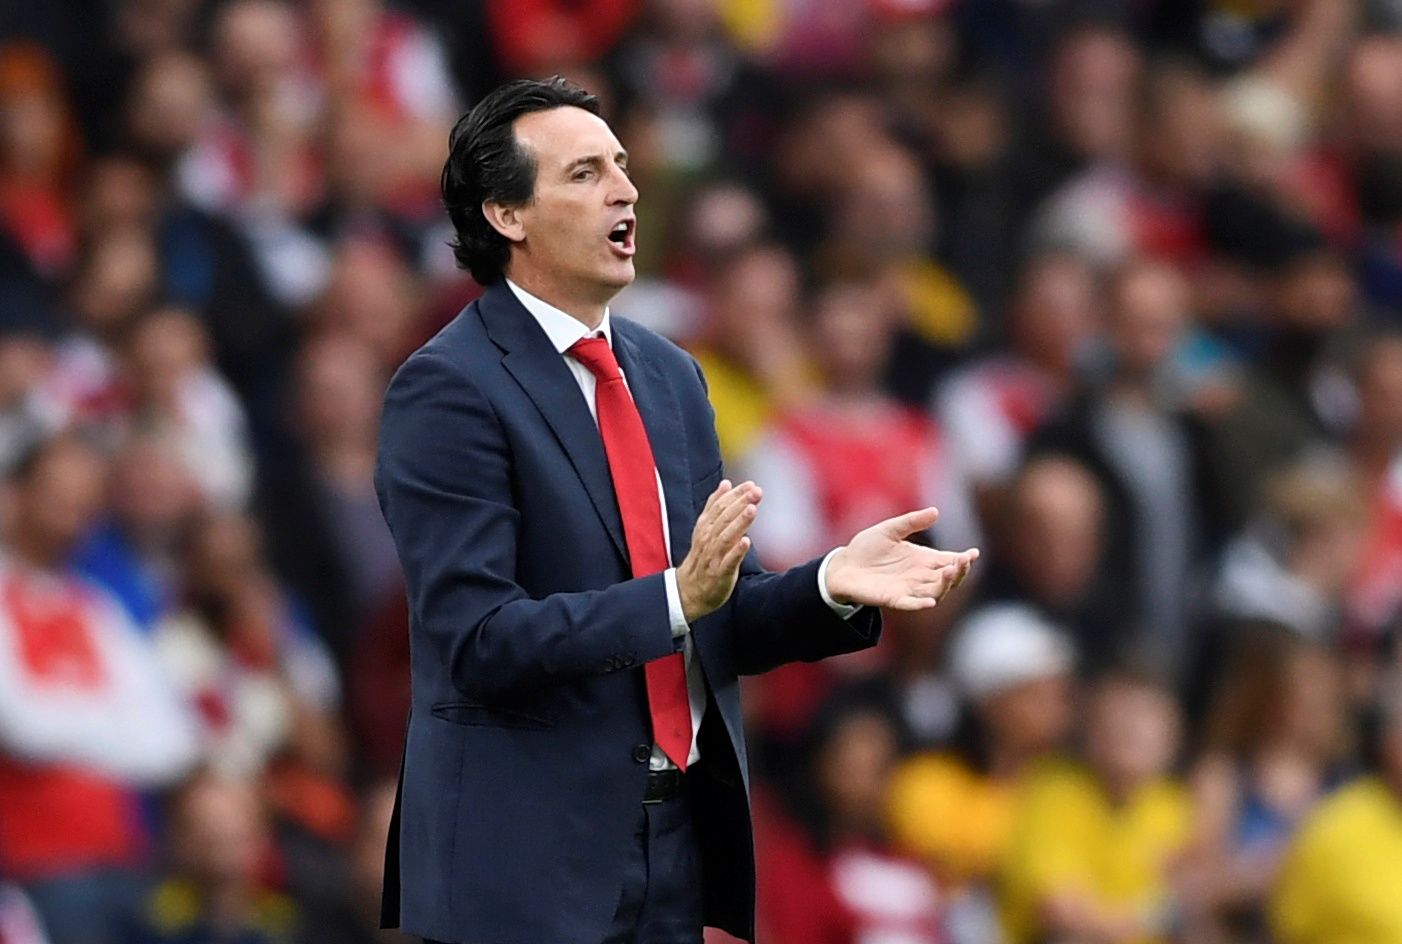 Soccer Football - Premier League - Arsenal v Aston Villa - Emirates Stadium, London, Britain - September 22, 2019  Arsenal manager Unai Emery gestures during the match      Action Images via Reuters/Tony O'Brien  EDITORIAL USE ONLY. No use with unauthorized audio, video, data, fixture lists, club/league logos or 